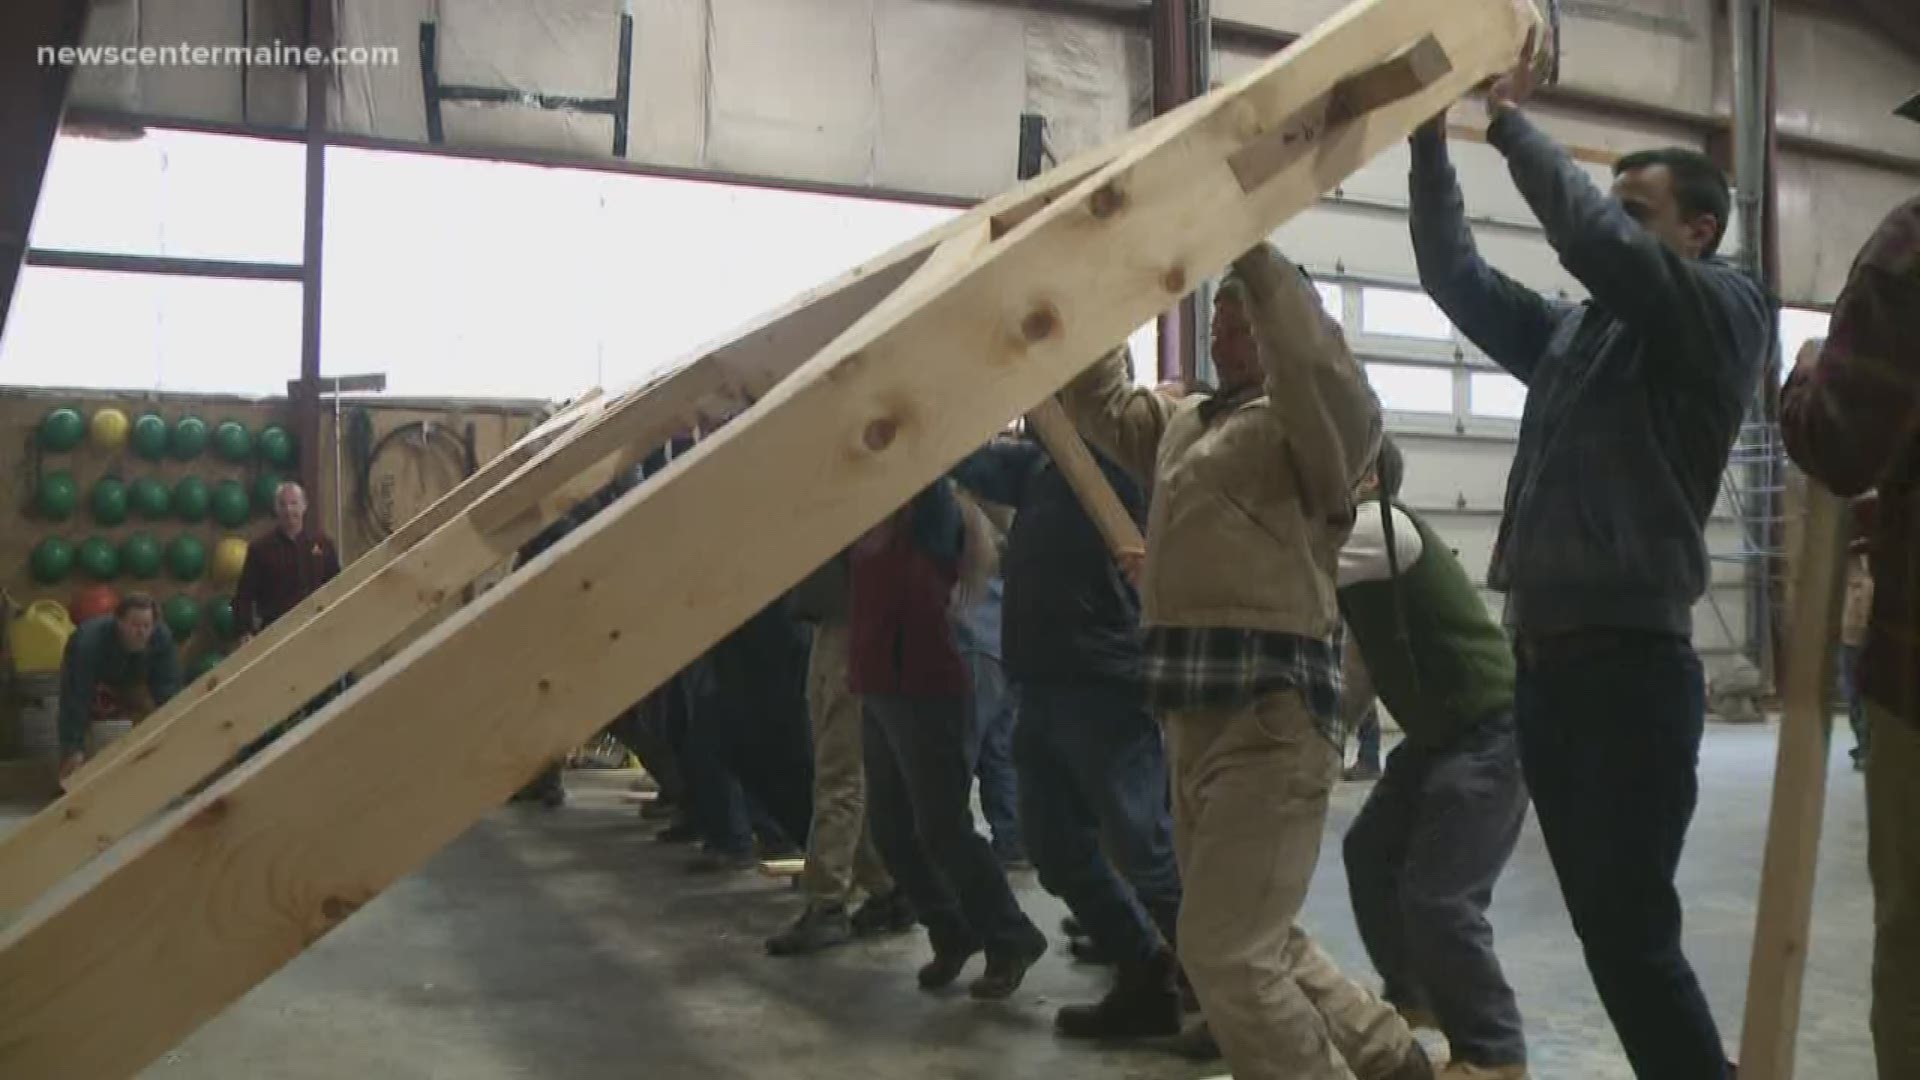 From timber framing to tool use, there are many resources available at the Shelter Institute.